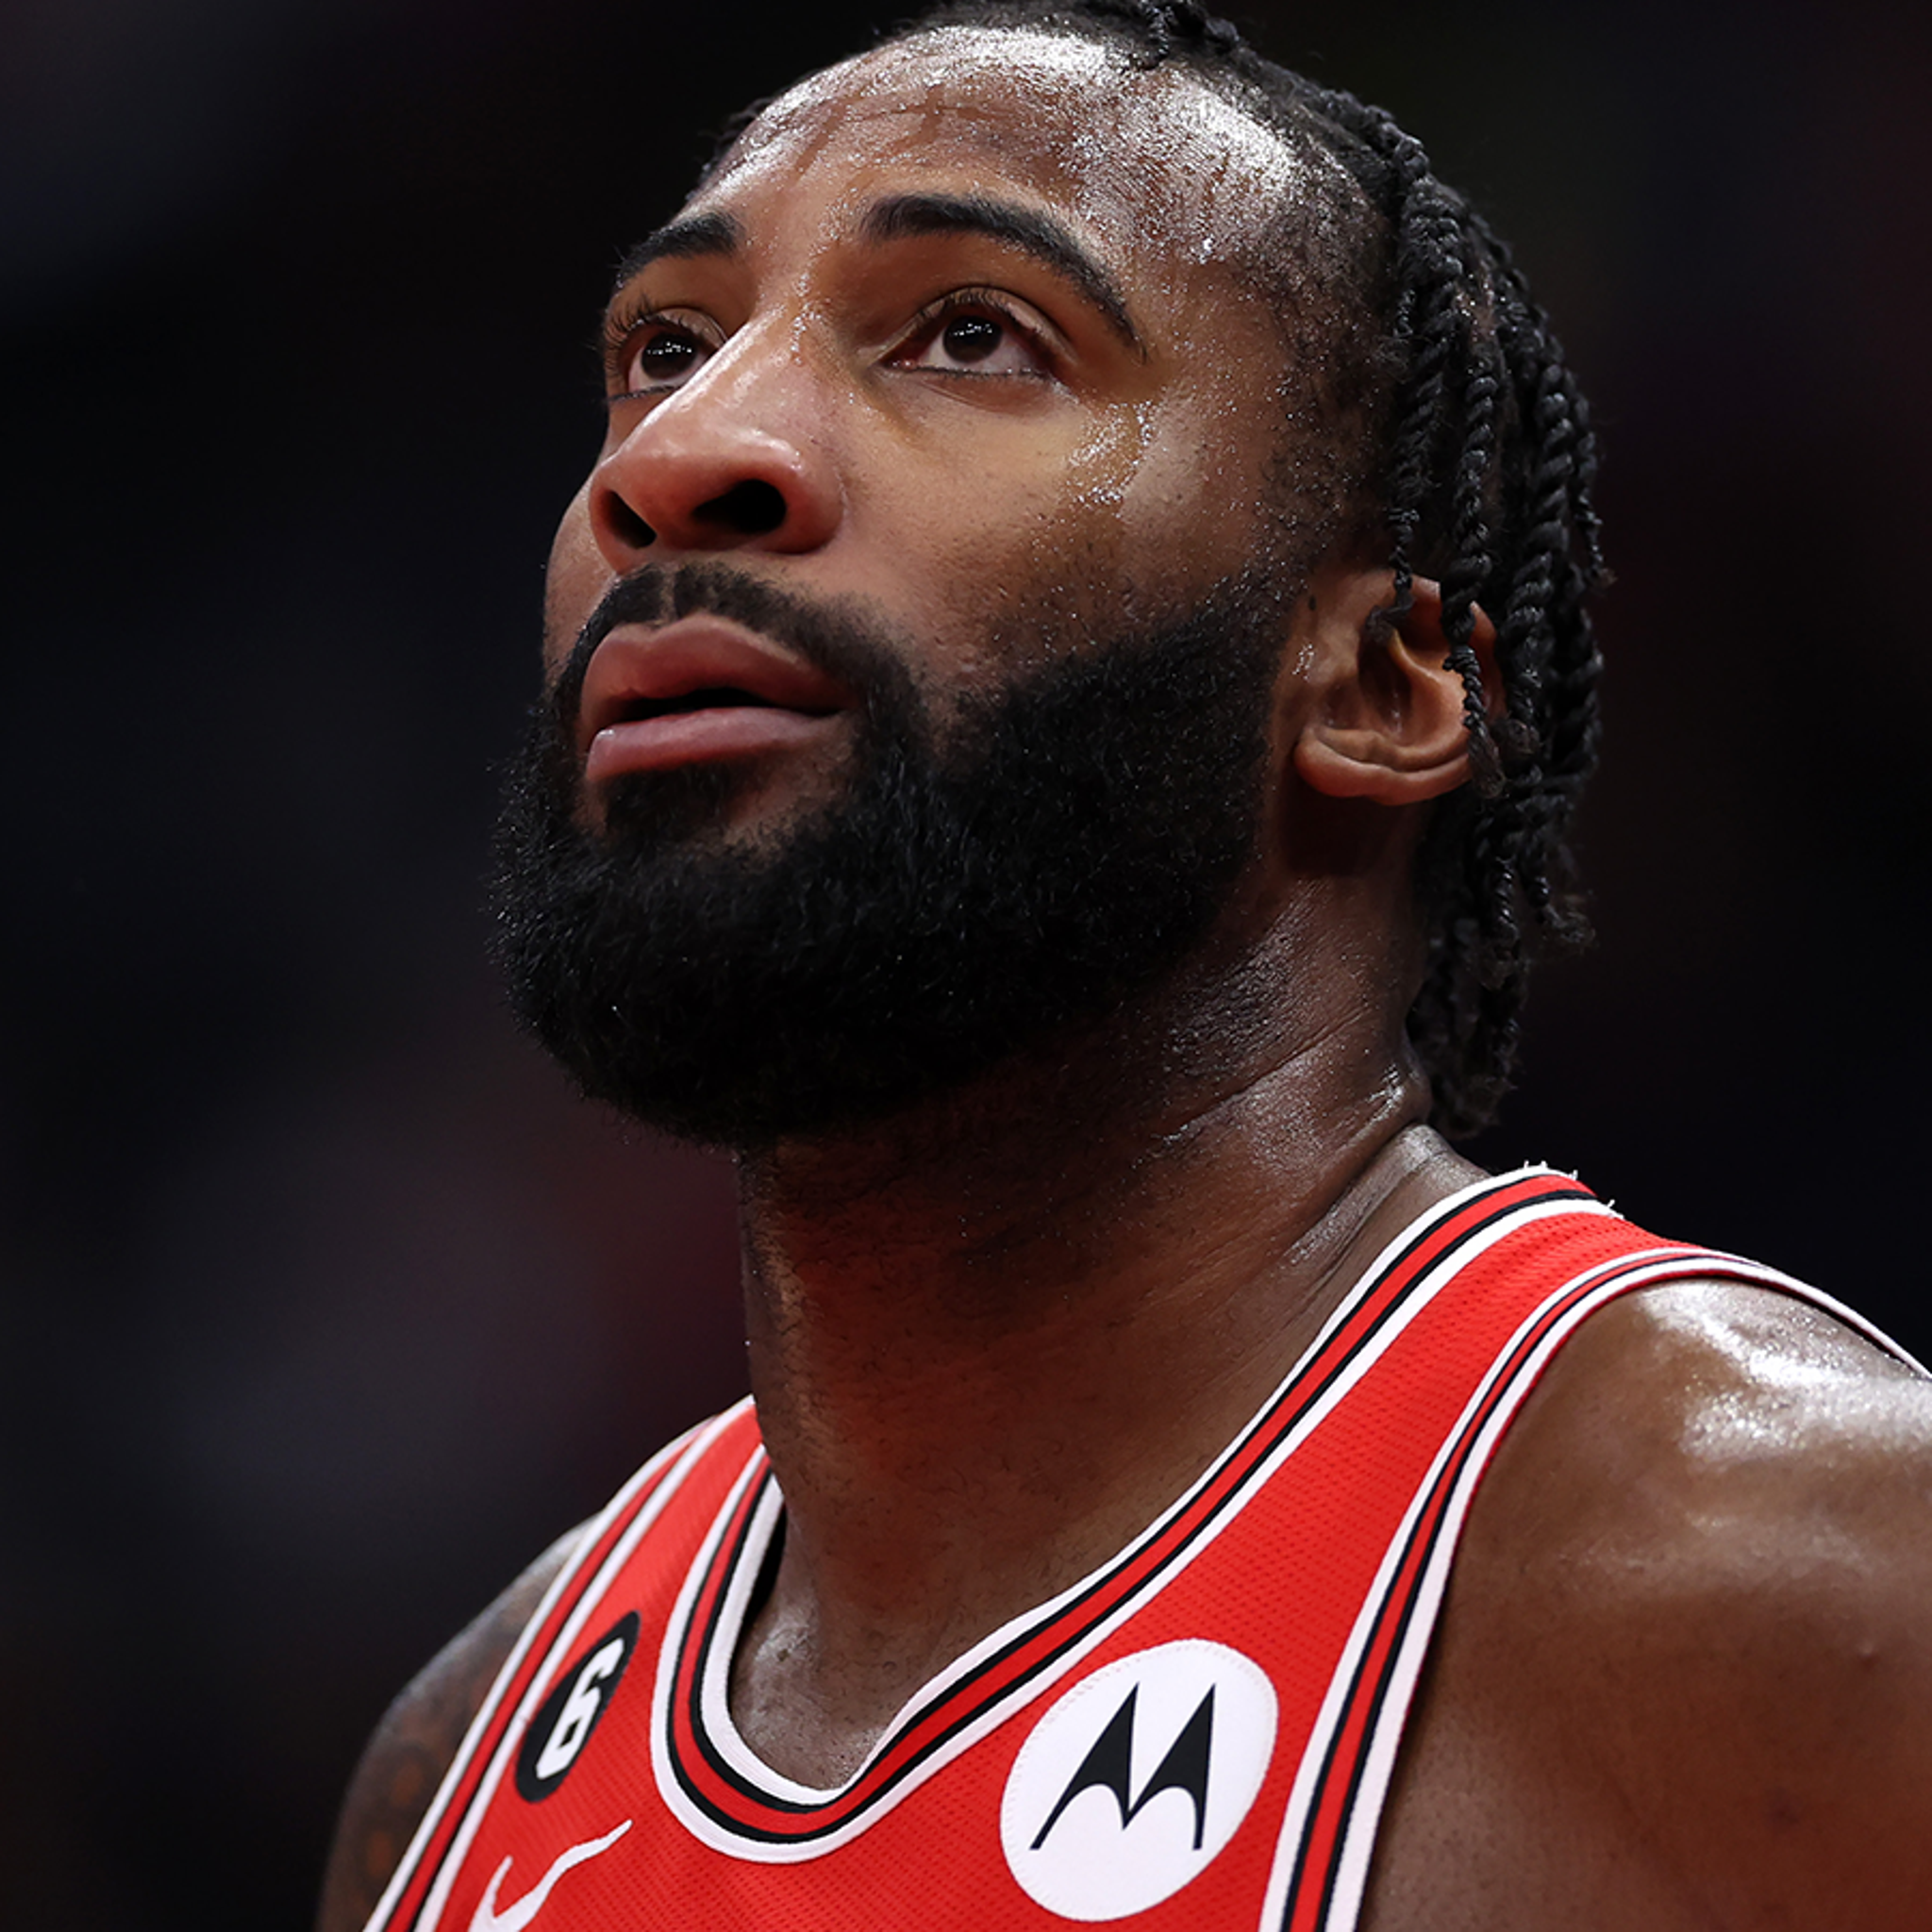 NBA's Andre Drummond Speaks Out On Mental Health Struggle